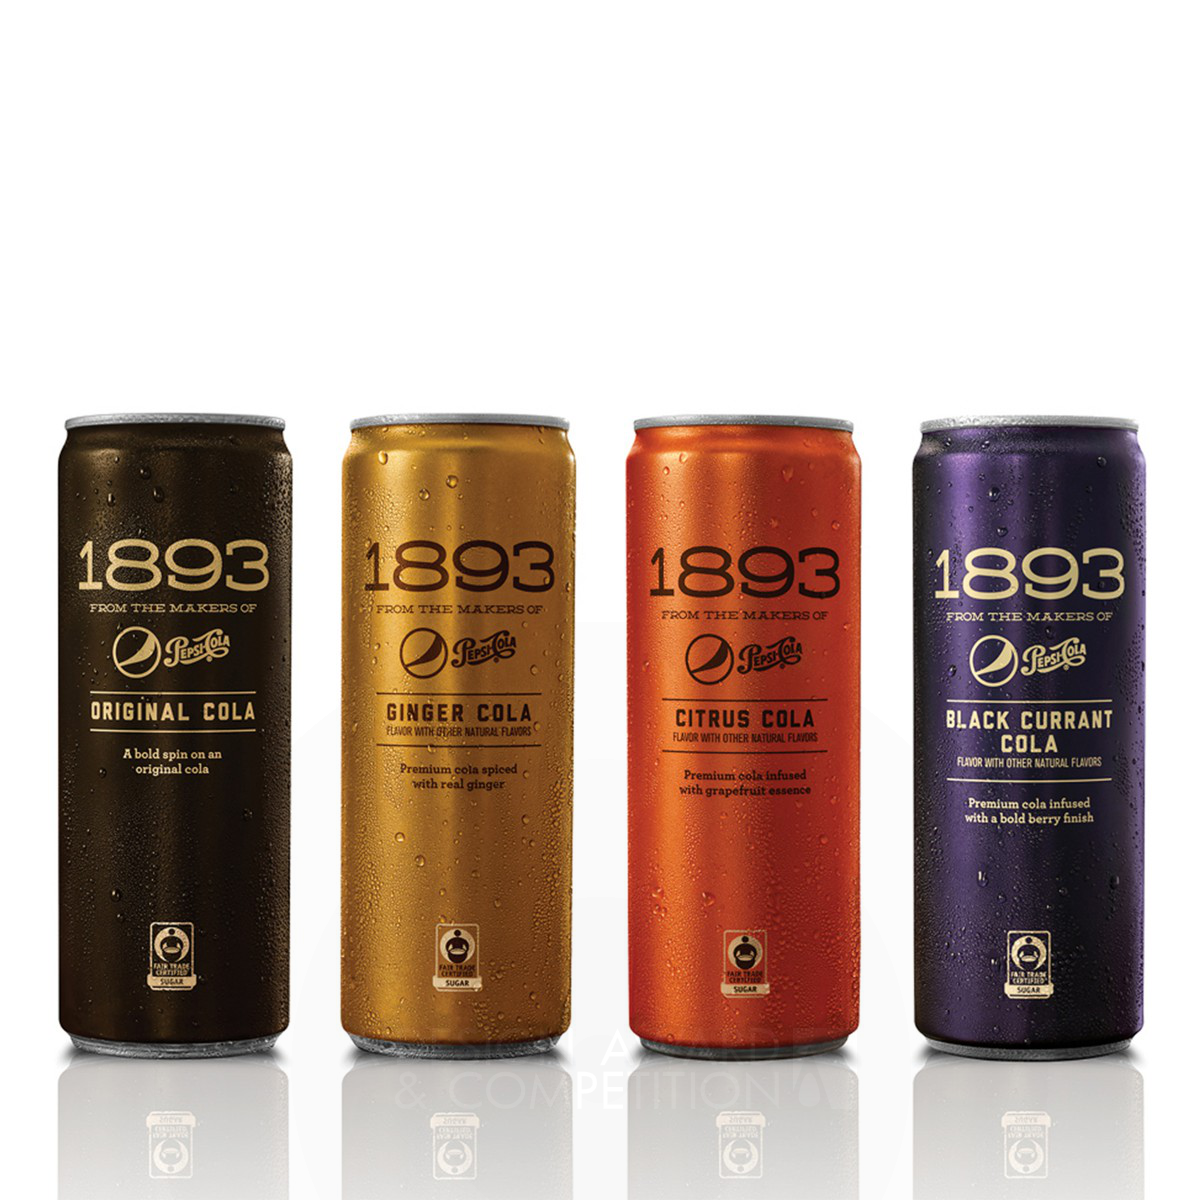 1893 from the makers of Pepsi-Cola Can Design by PepsiCo Design and Innovation